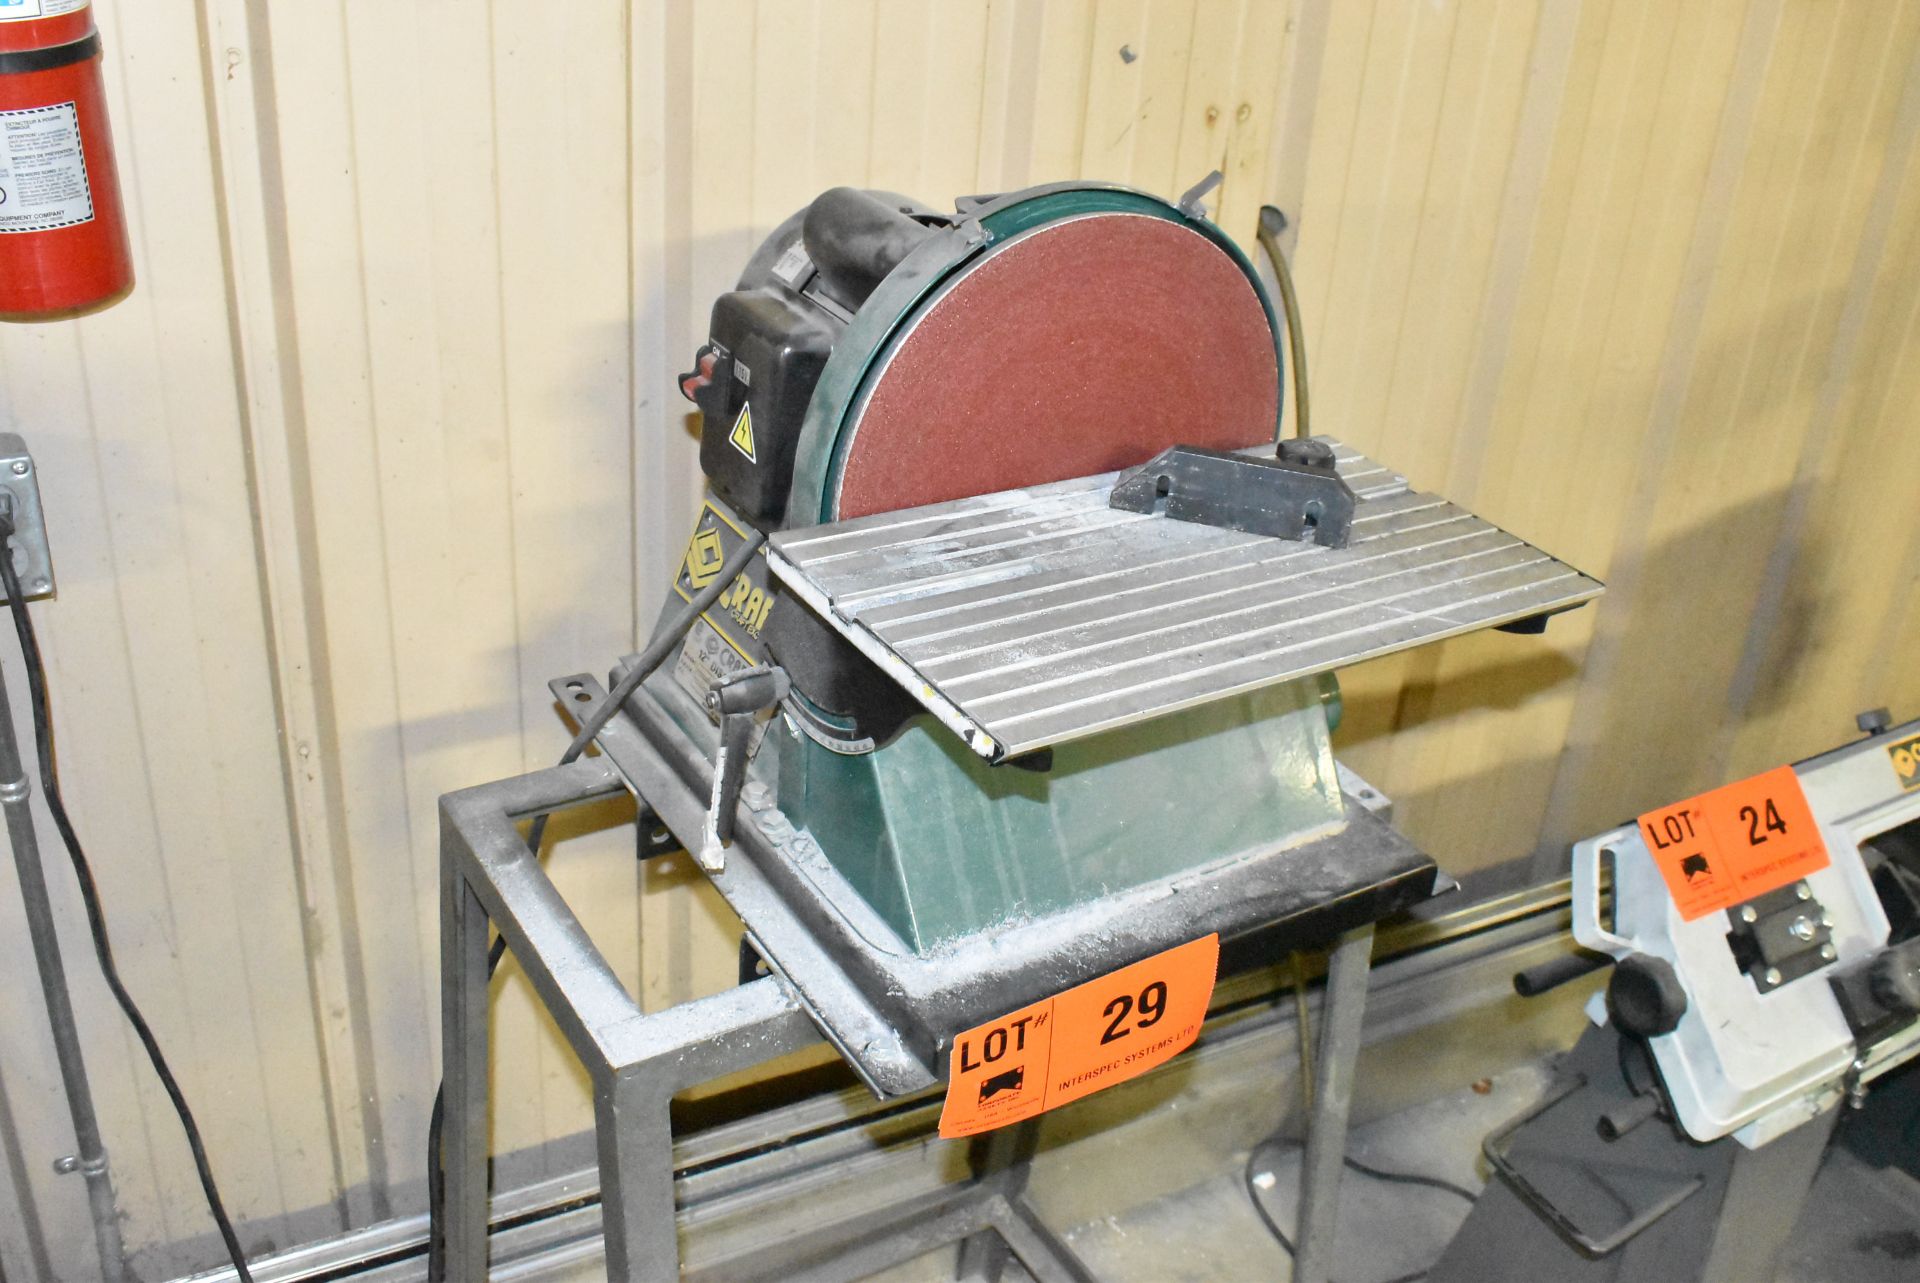 CRAFTEX 12" DISC SANDER, S/N A022236 [RIGGING FOR FOR LOT #29 - $25 CAD PLUS APPLICABLE TAXES]